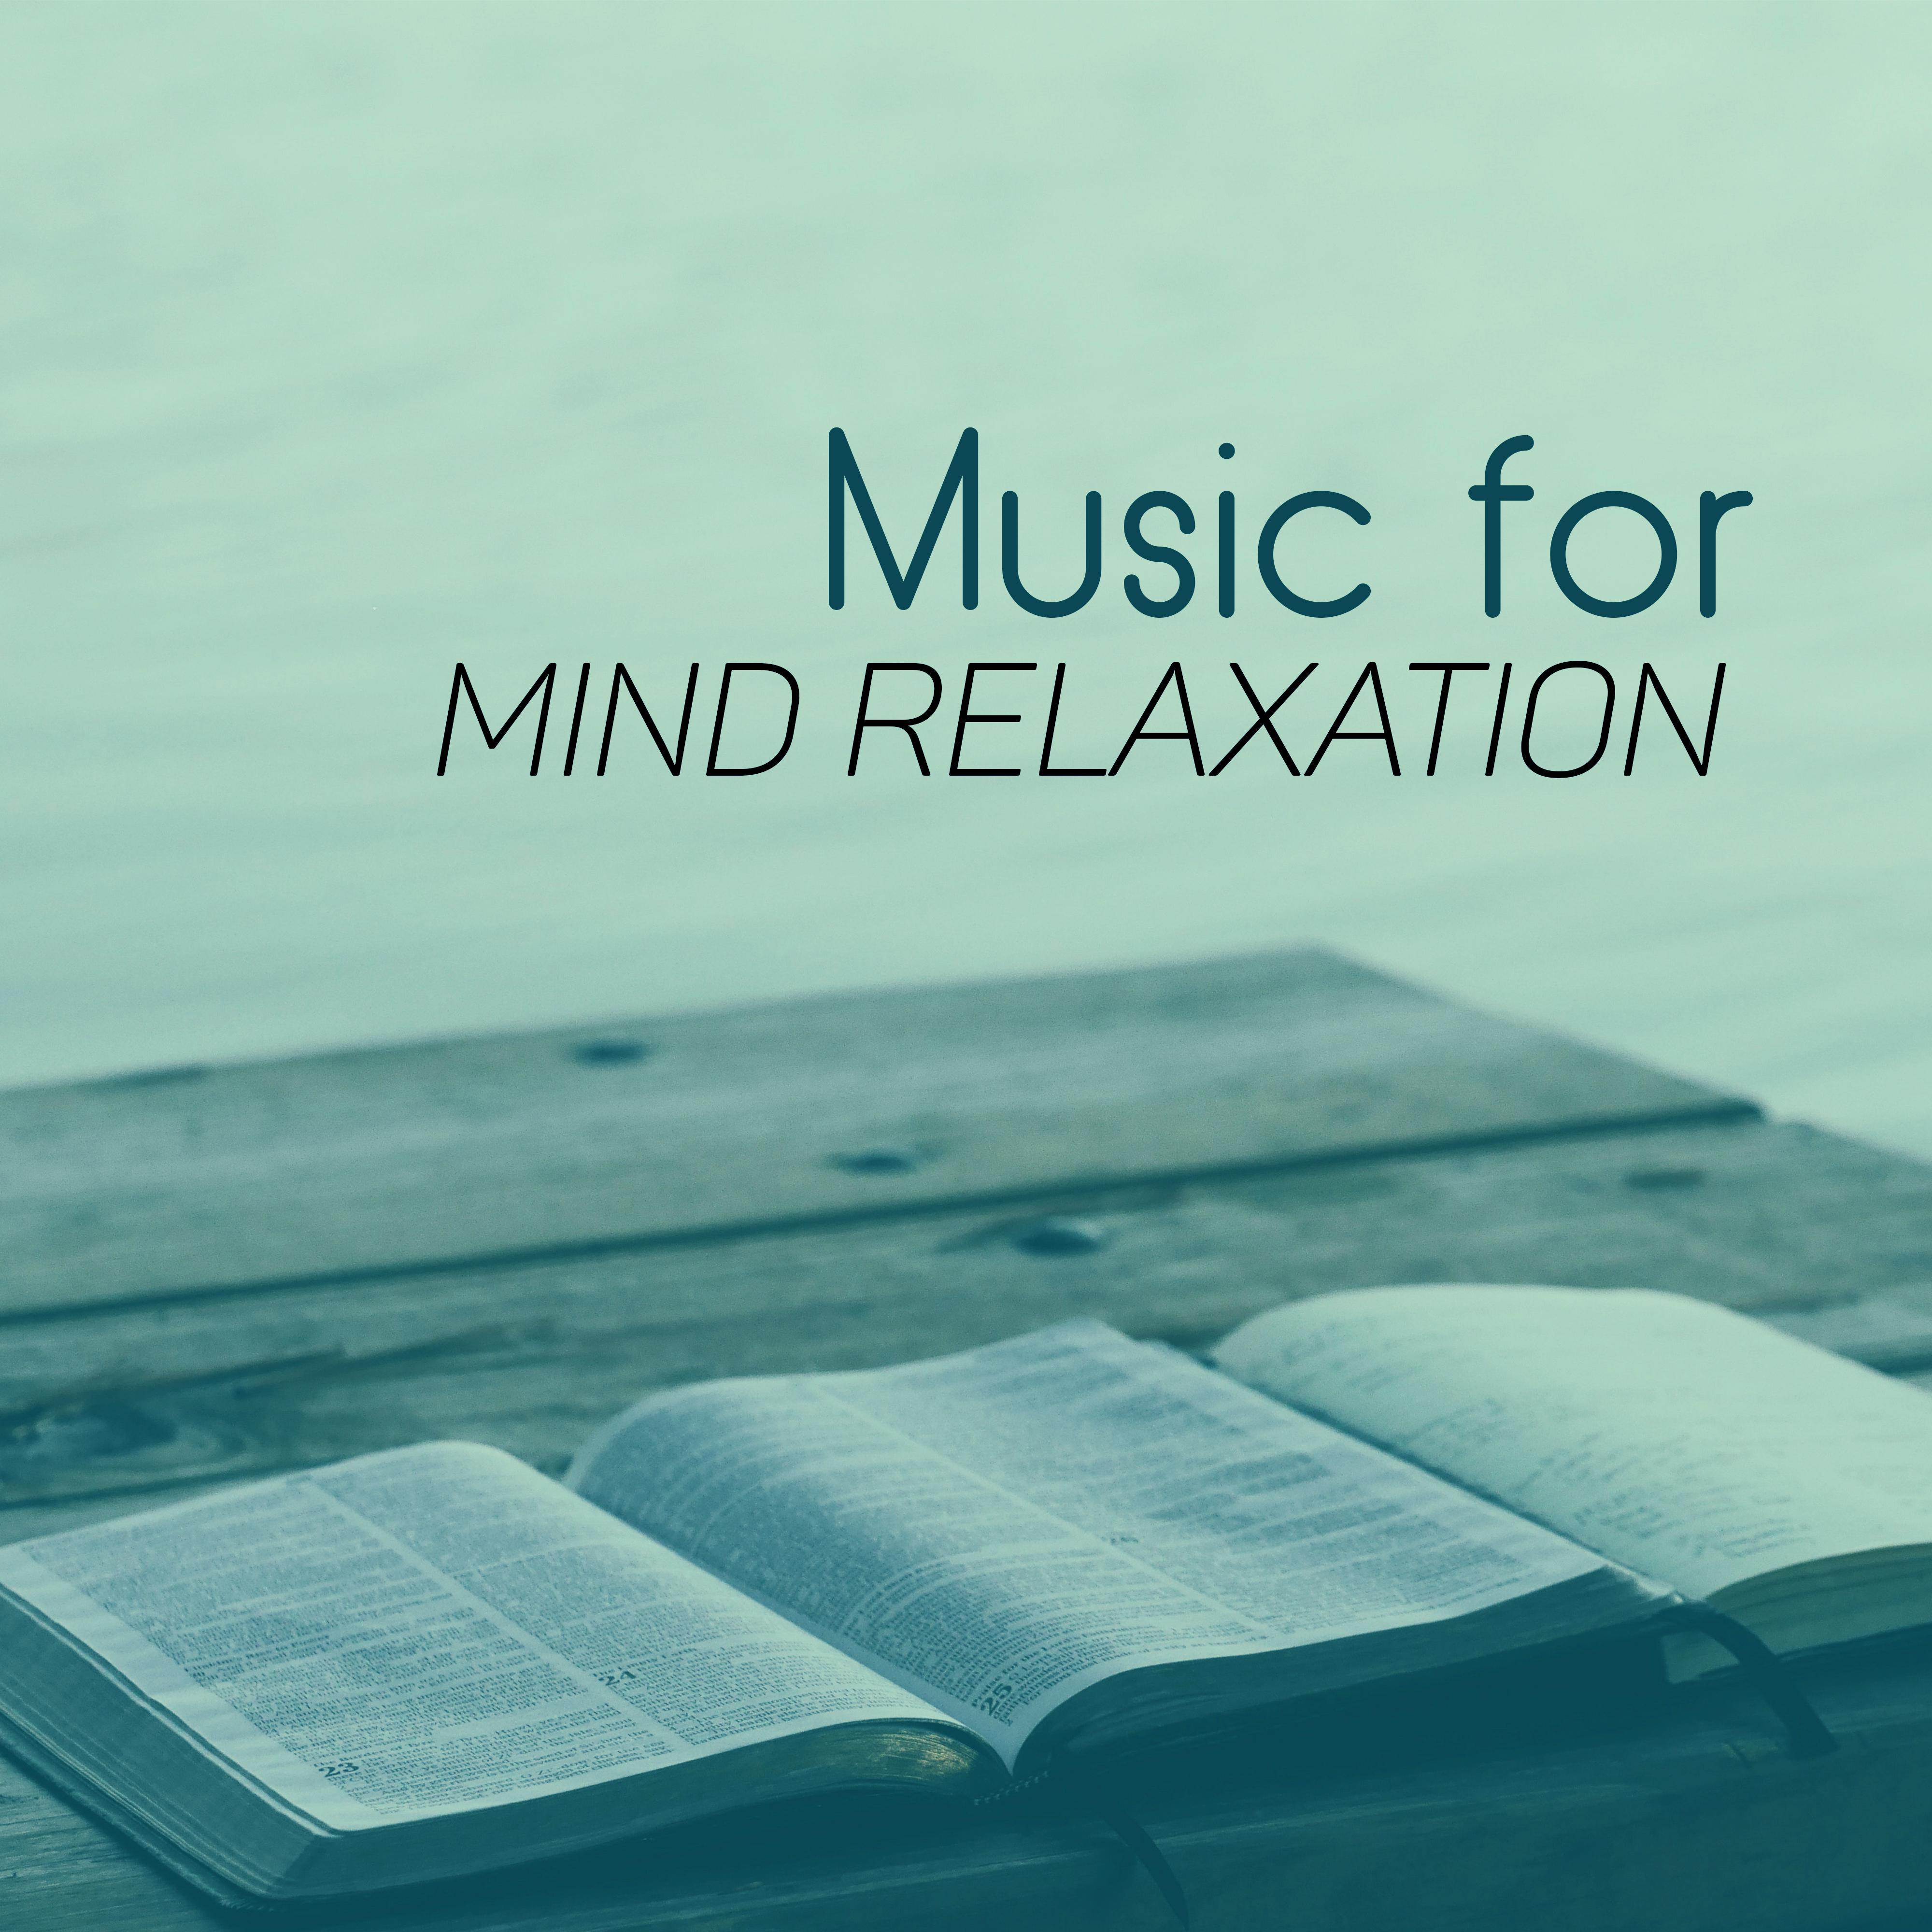 Music for Mind Relaxation  Easy Listening Classical Music, Sounds to Relax, Peaceful Songs